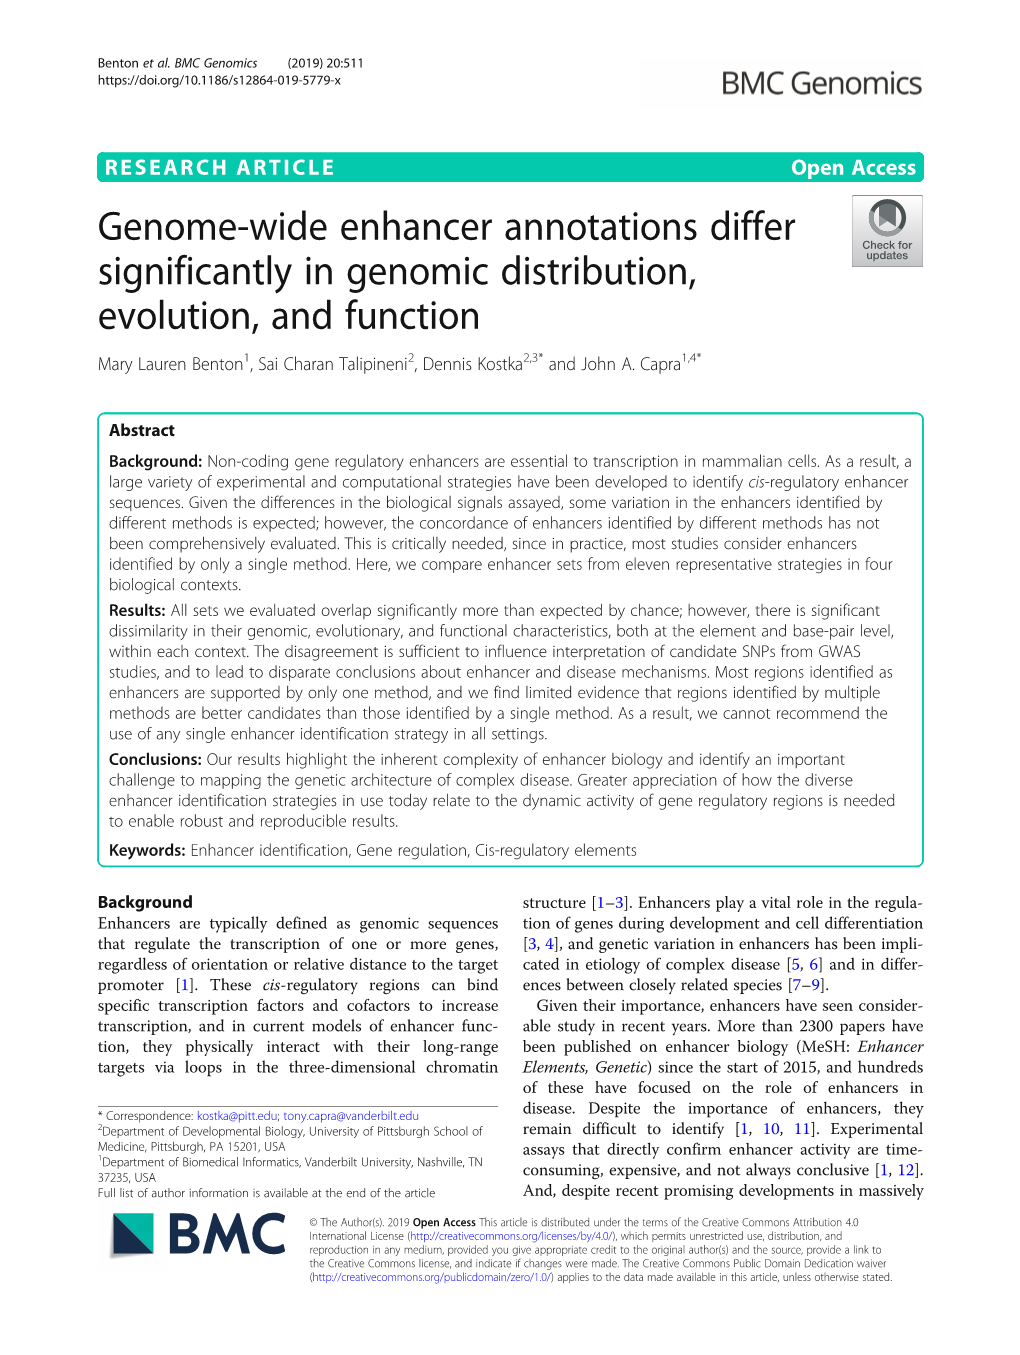 Genome-Wide Enhancer Annotations Differ Significantly in Genomic Distribution, Evolution, and Function